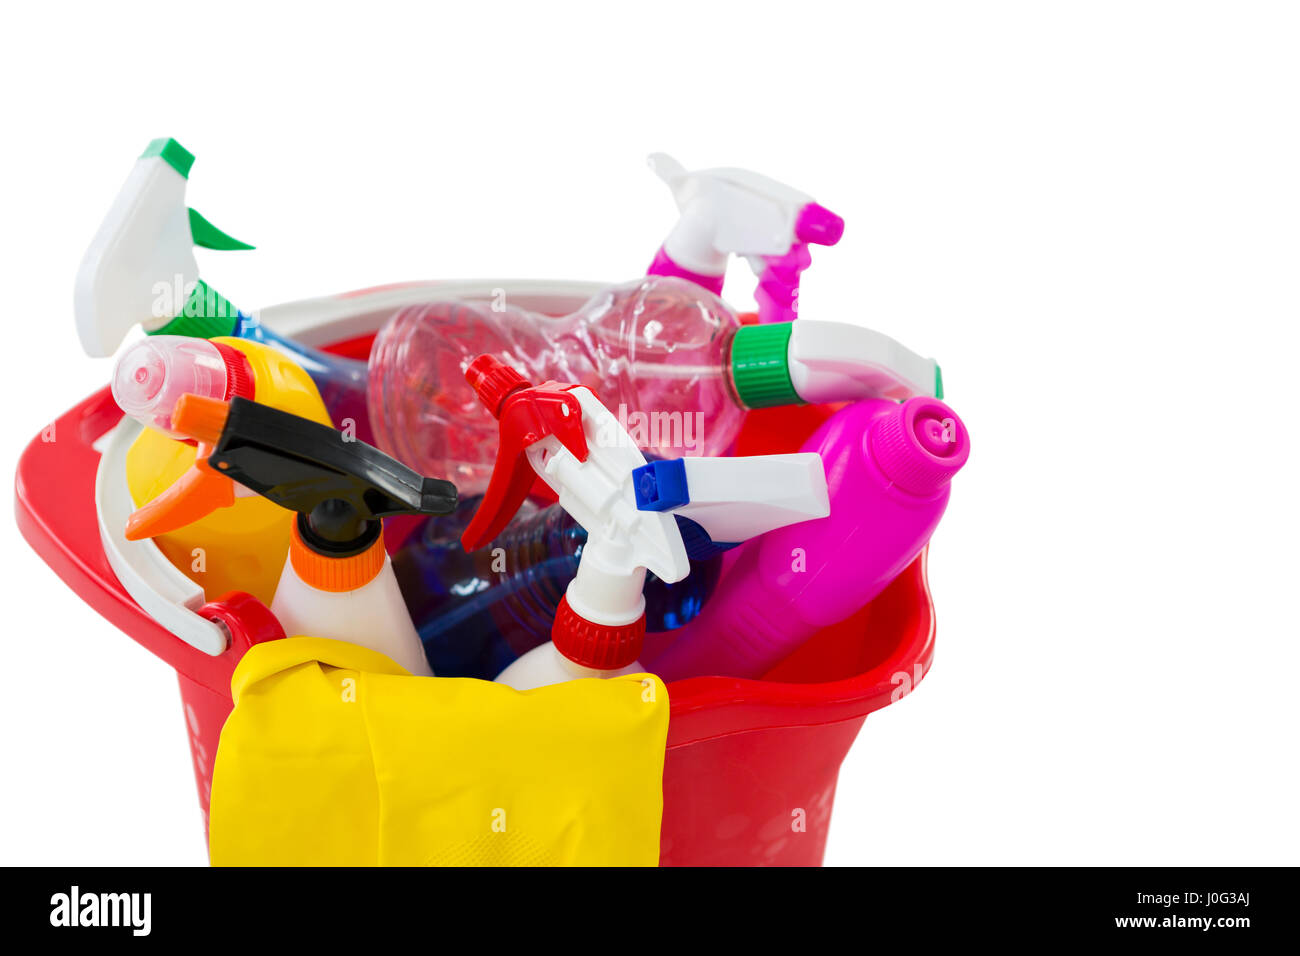 High angle view of cleaning spary and bottles in bucket against white background Stock Photo